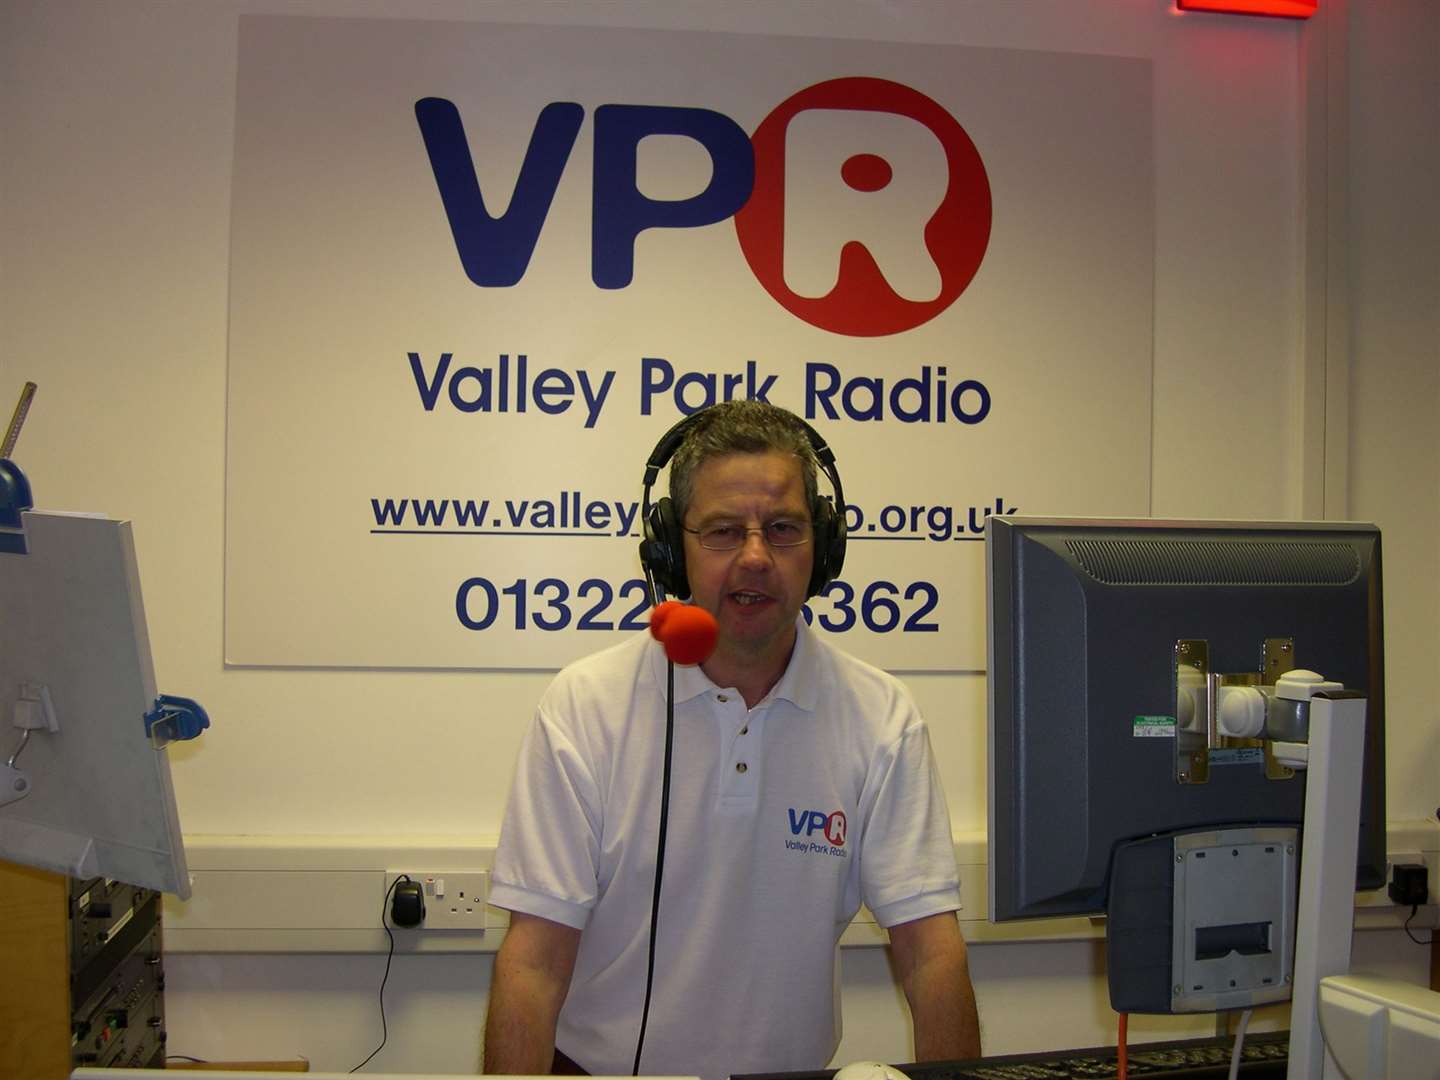 Peter Hammond, 62, is a DJ for Valley Park Radio at Darent Valley Hospital